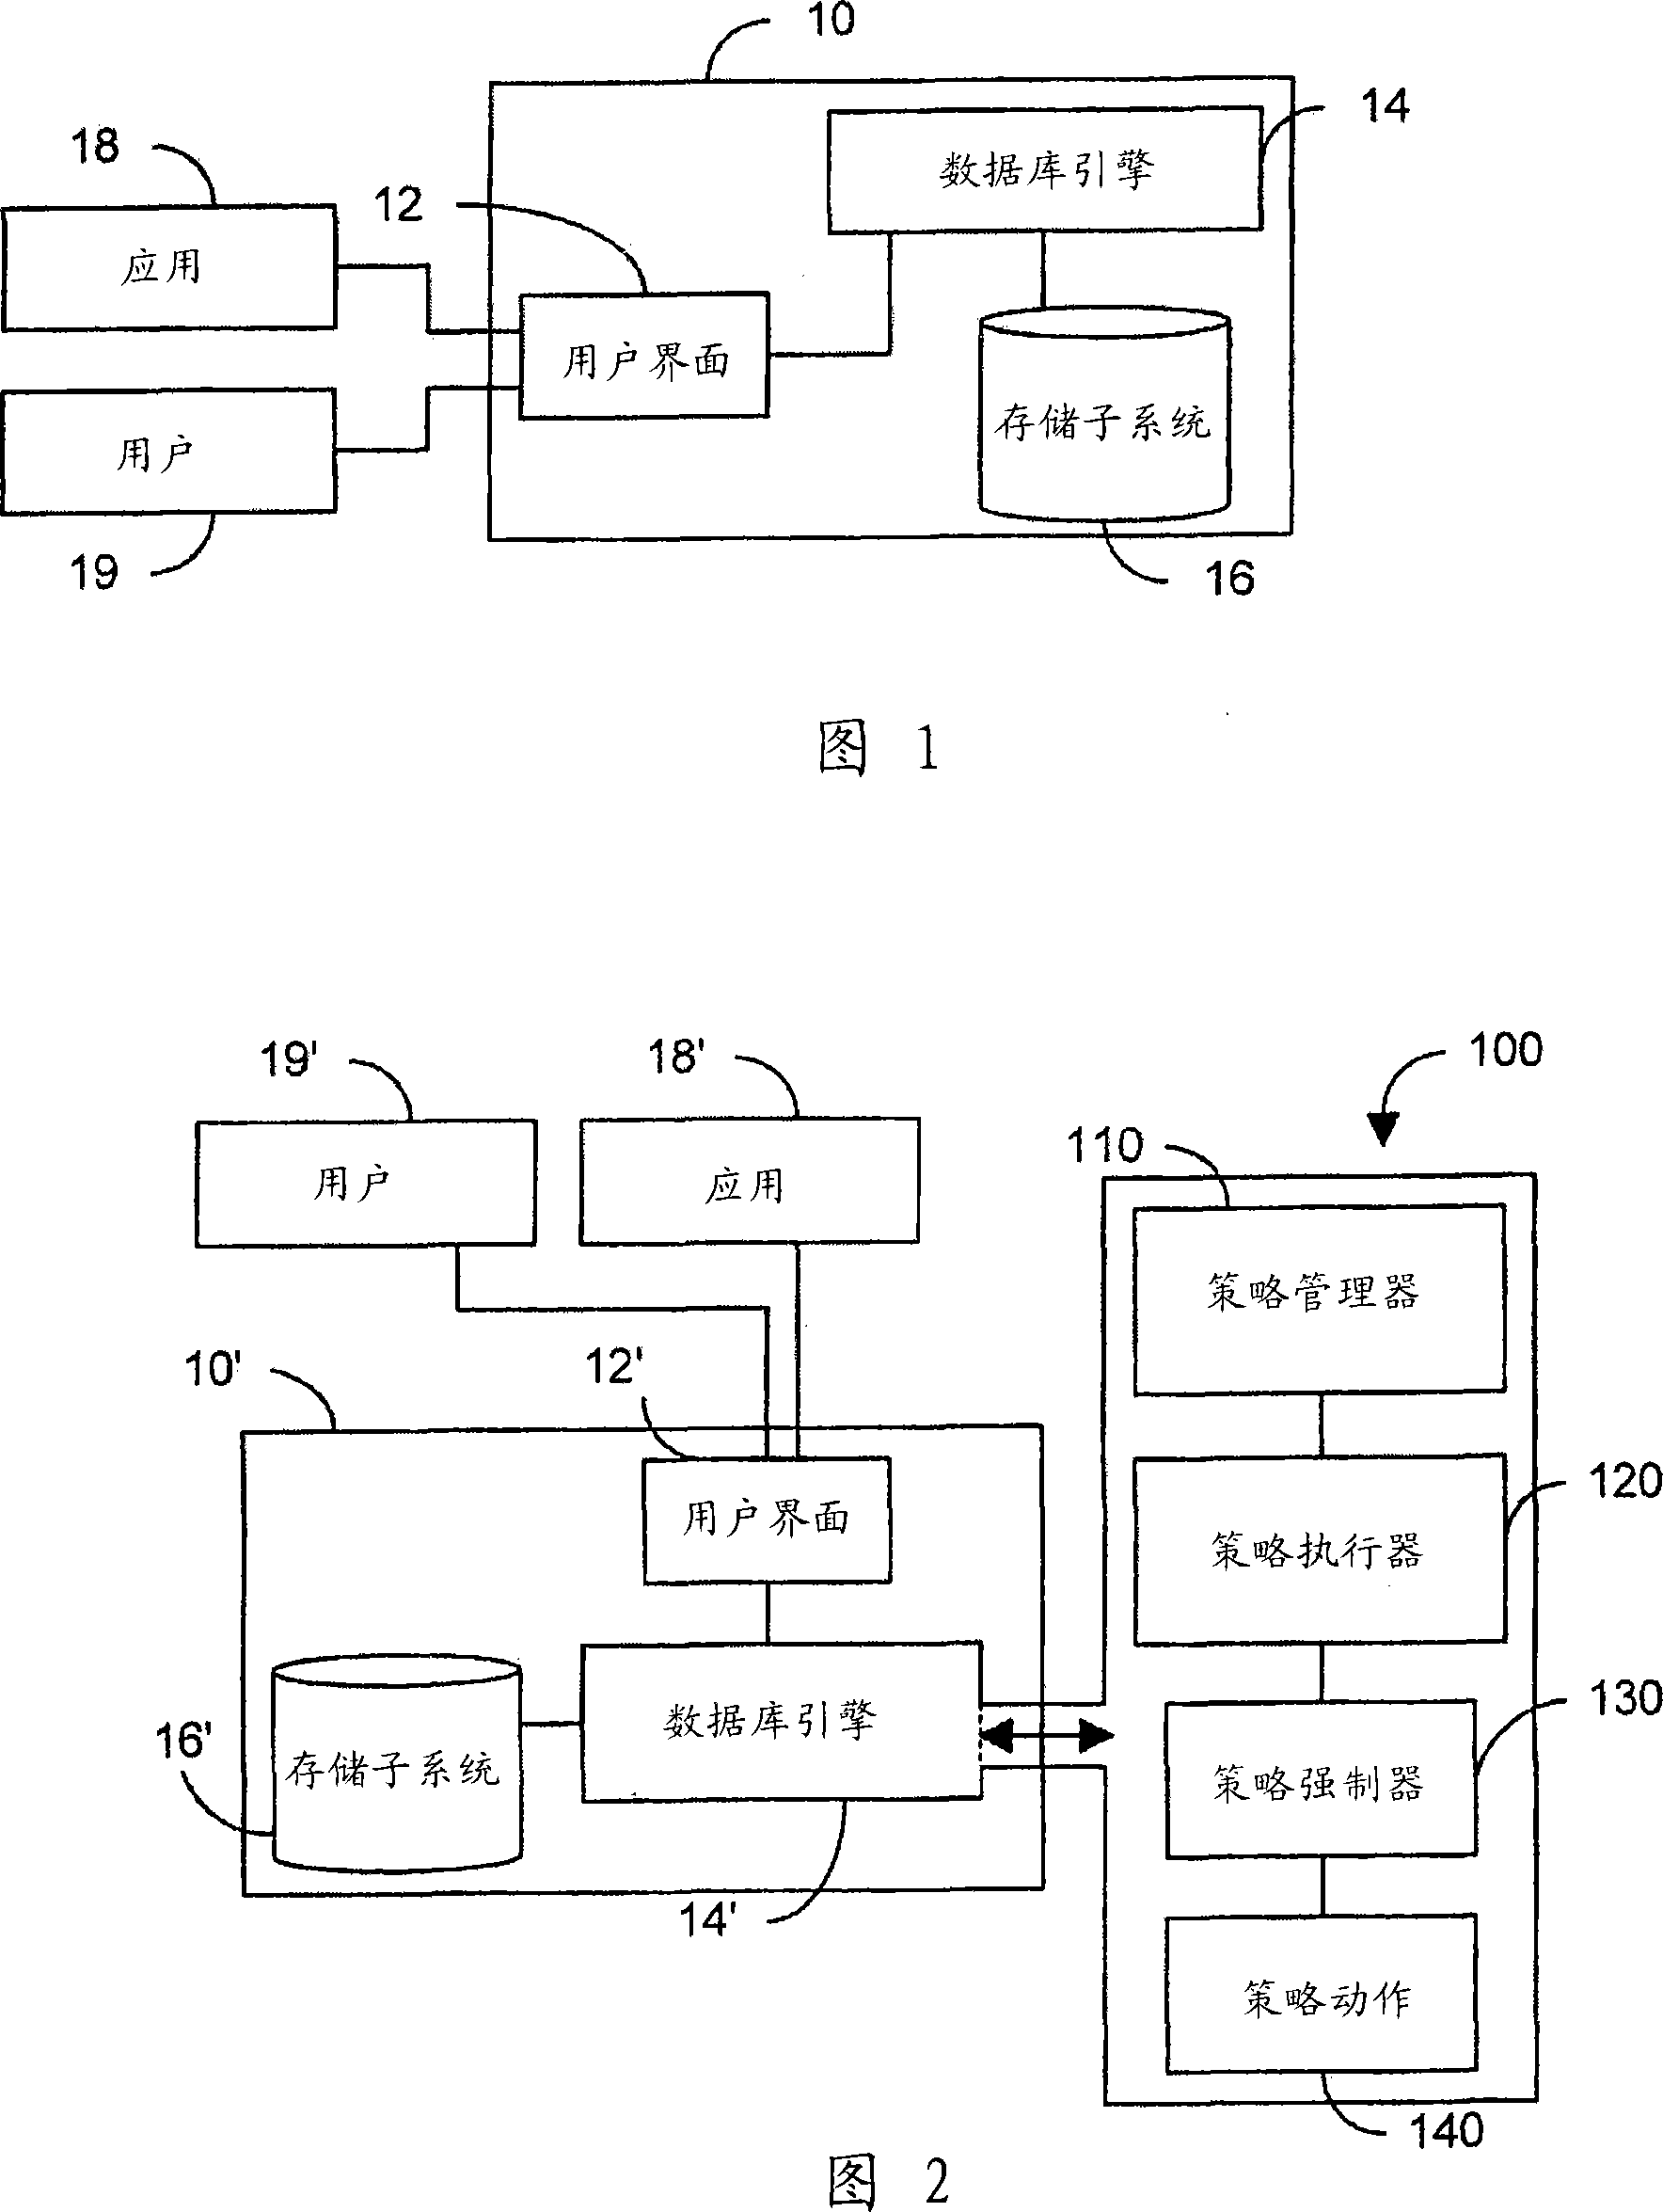 Method and system managing a database system using a policy framework